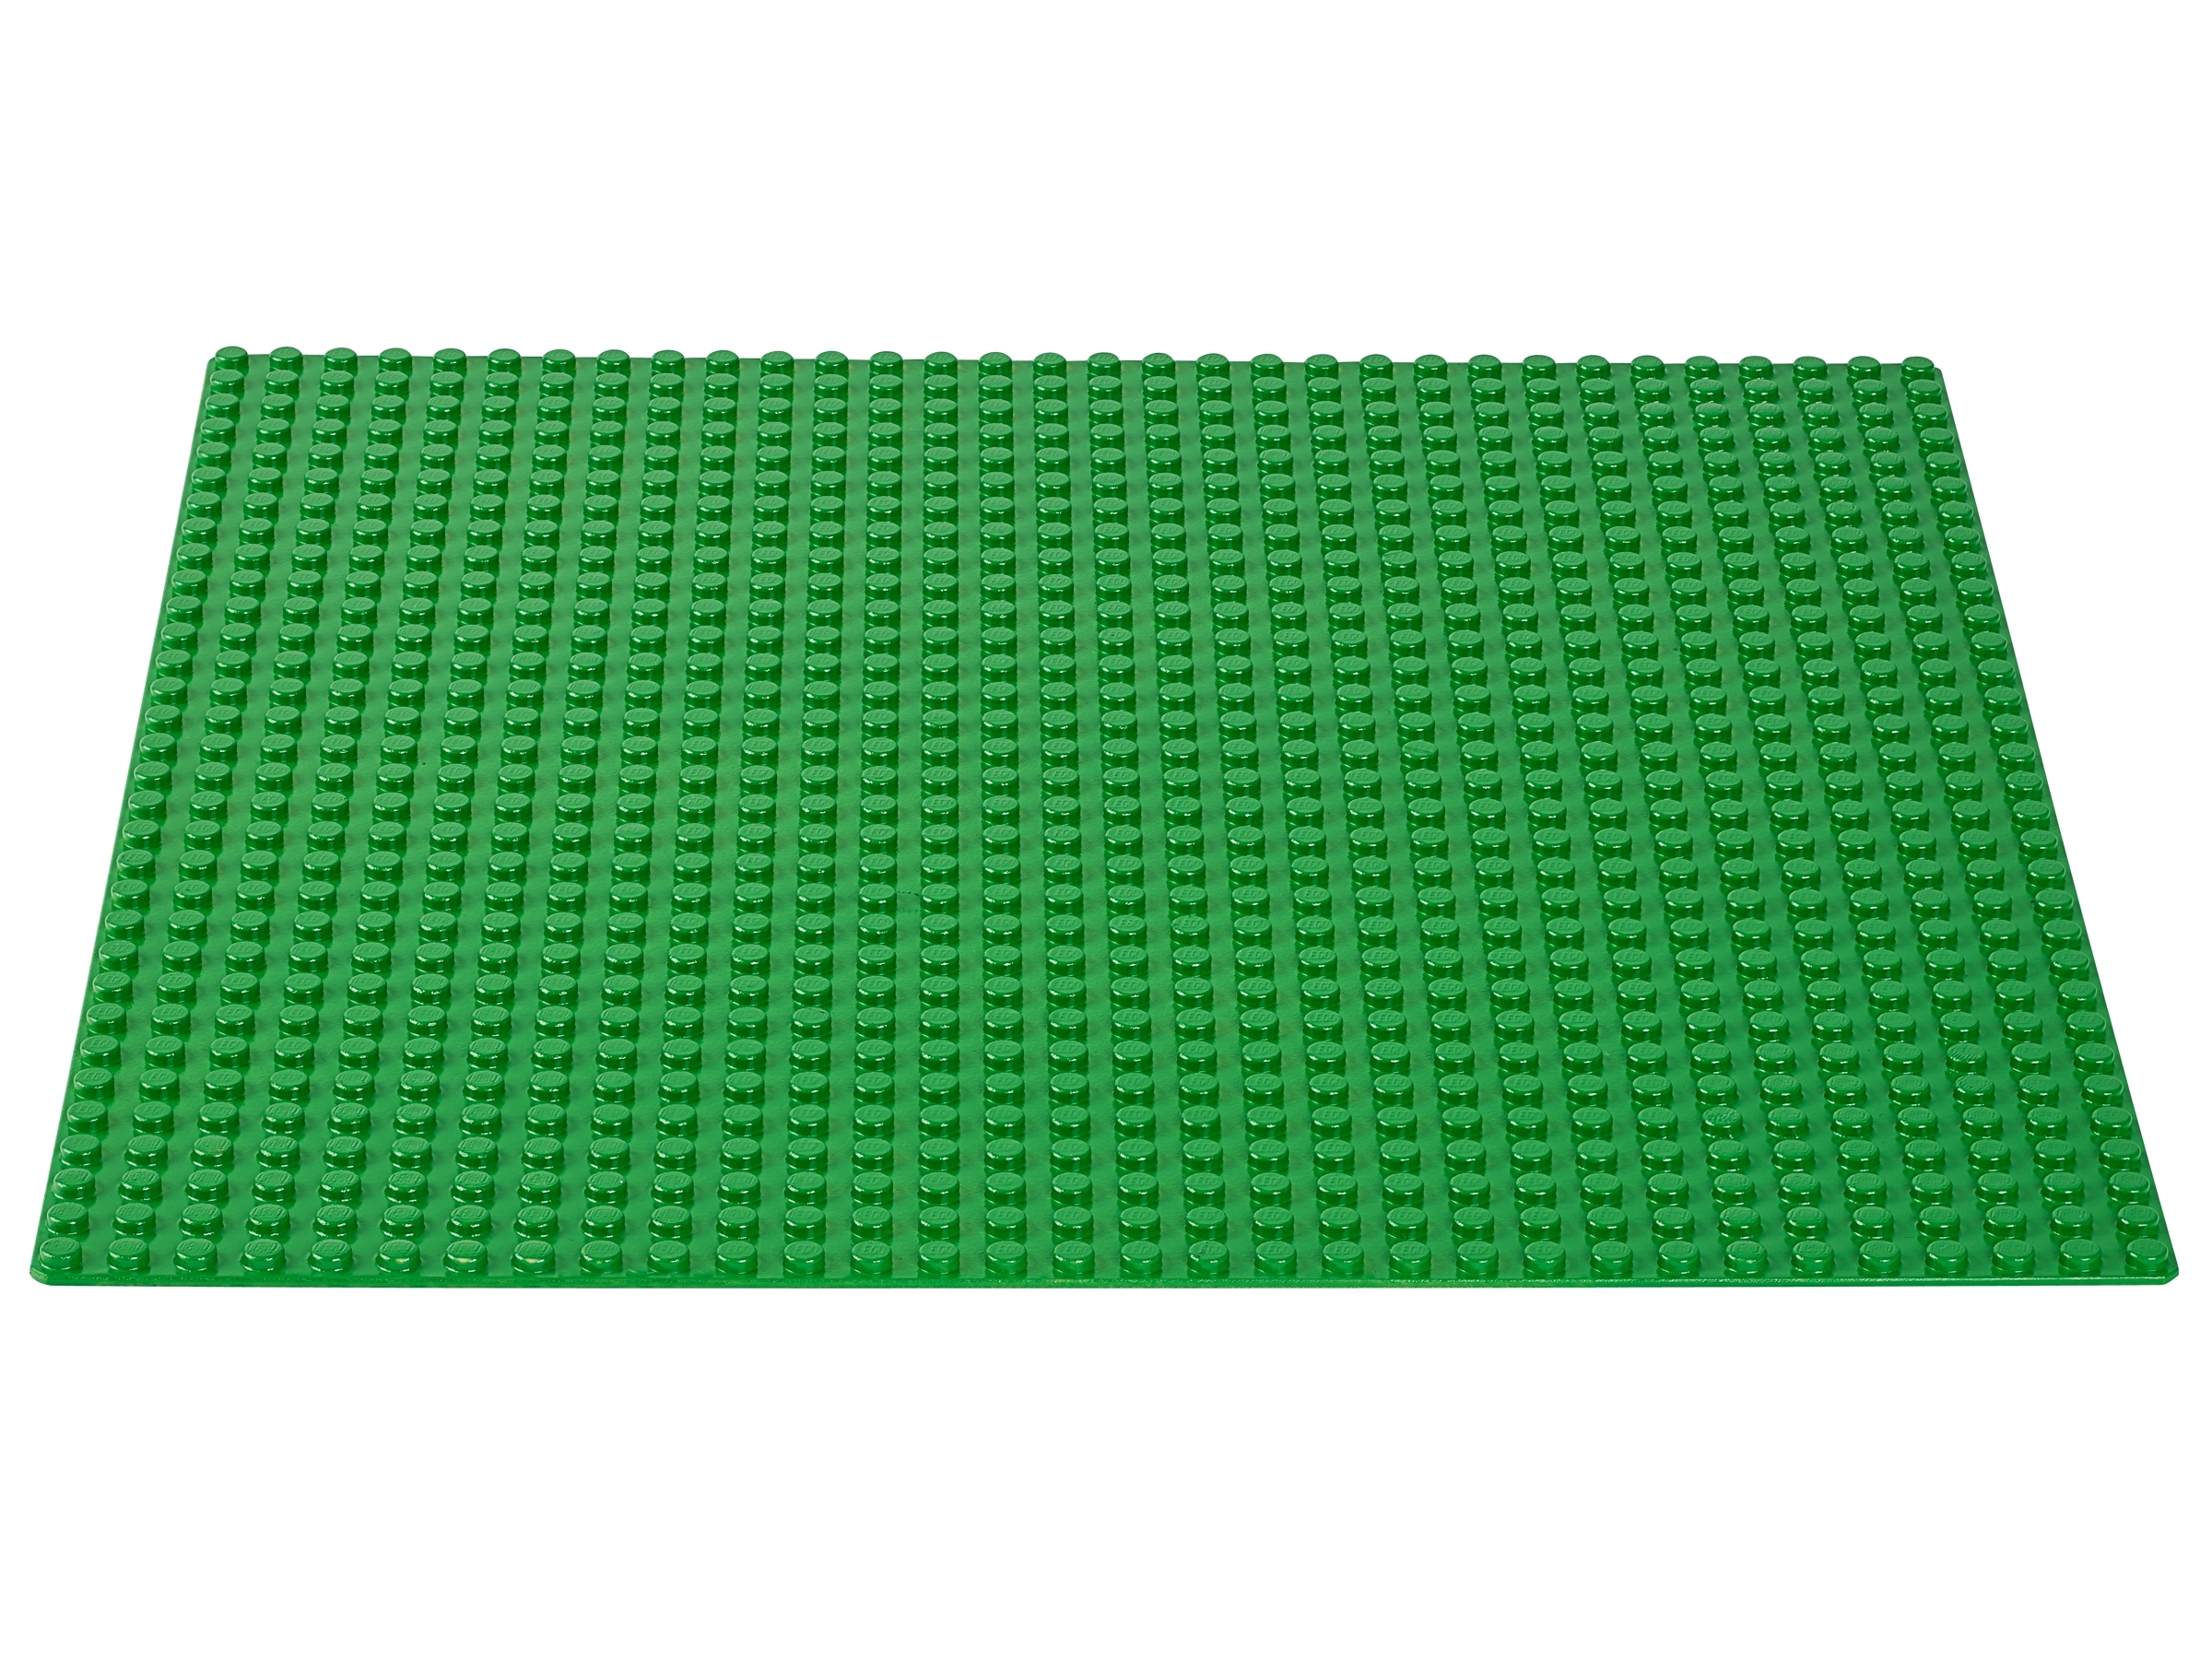 10700 LEGO Classic Green Baseplate 1 Piece 25x25cm 32x32 Studs Building Plate 